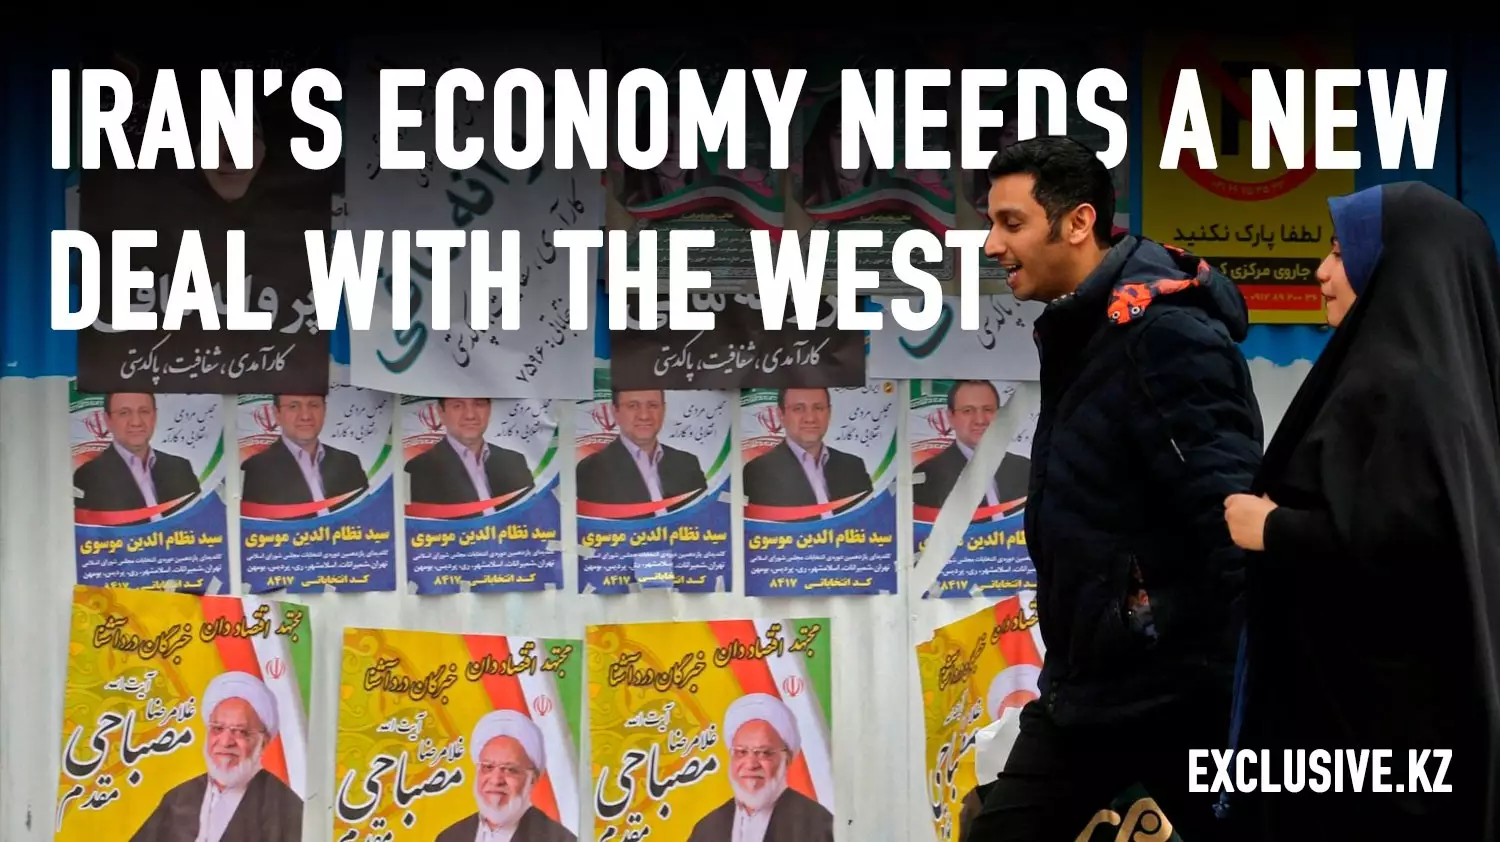 What will Iran’s new president do with a slew of economic problems he inherited?